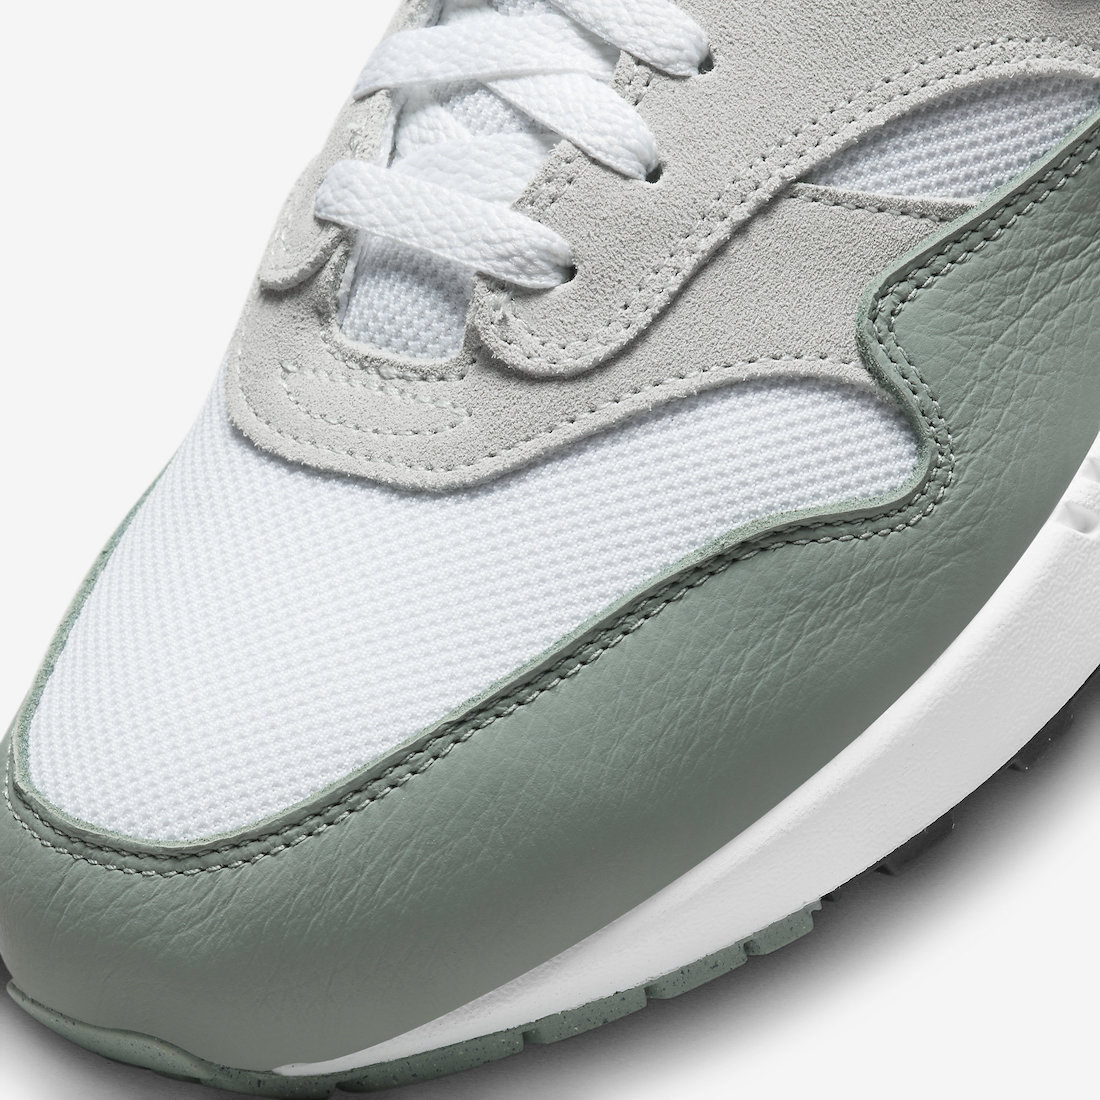 Nike Air Max 1 'White Mica Green' DZ4549-100 - Shop the Latest Nike Air Max Styles Today